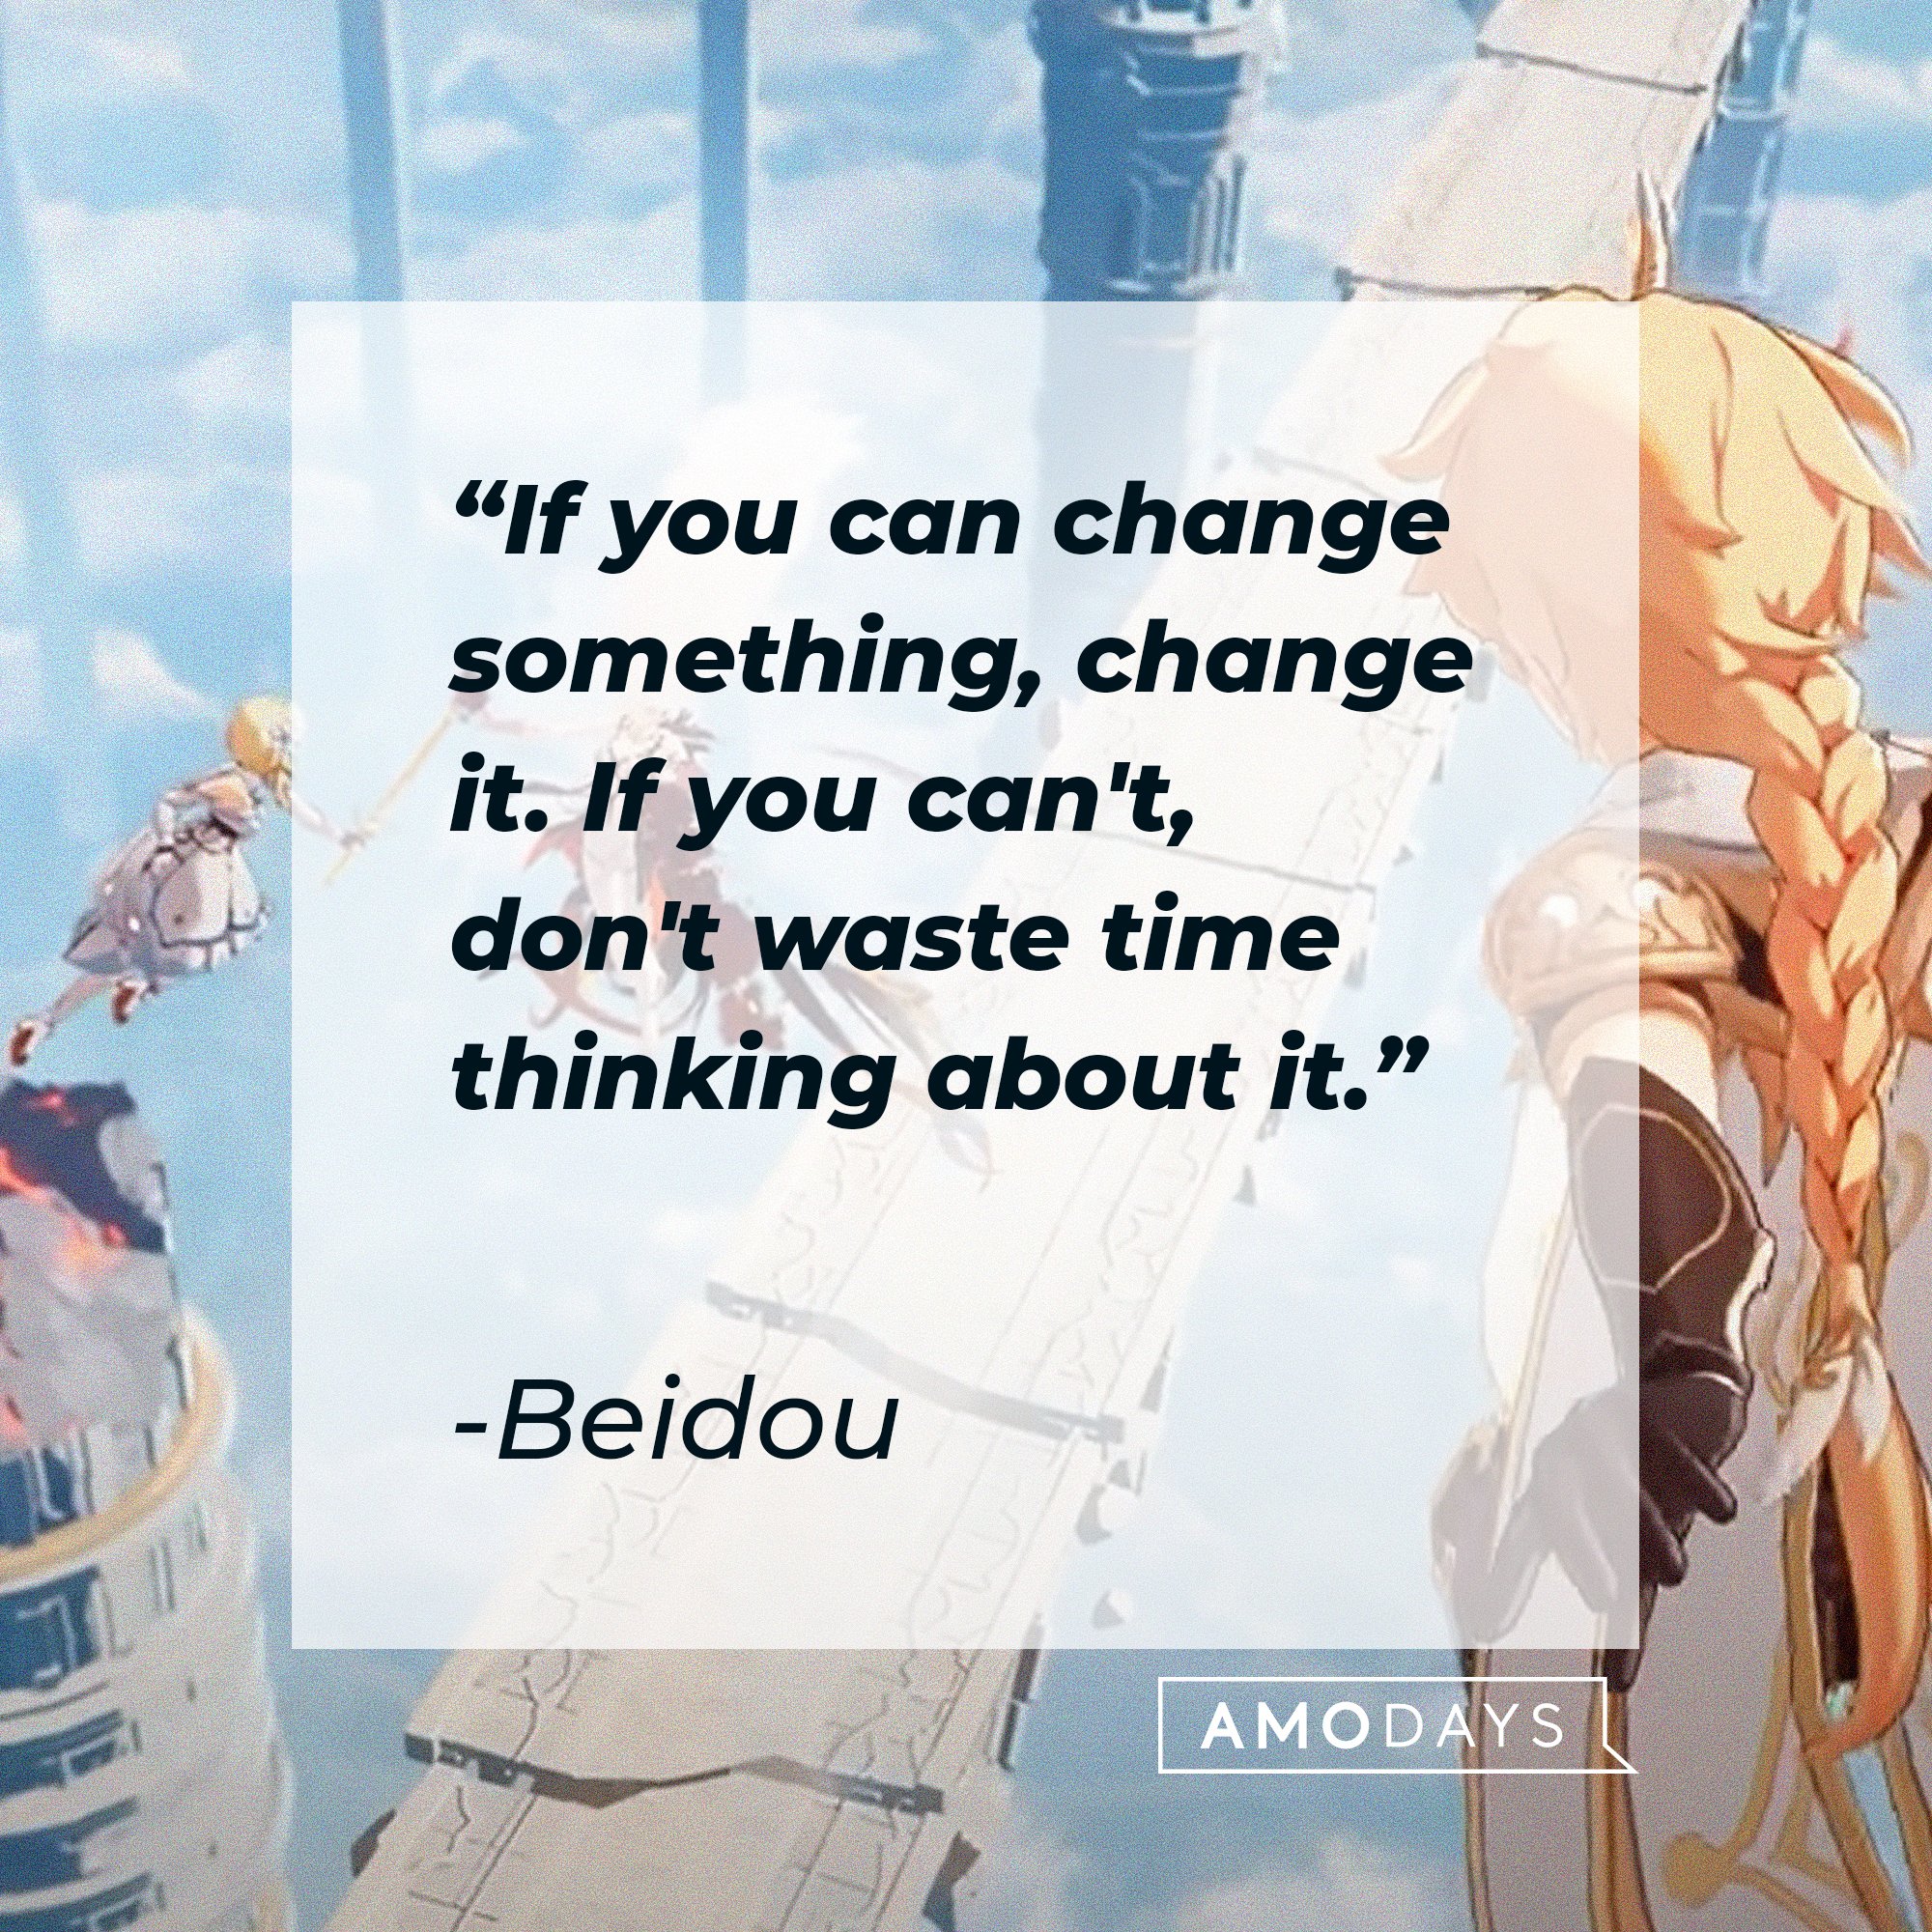 Beidou's quote: "If you can change something, change it. If you can't, don't waste time thinking about it." | Image: AmoDays